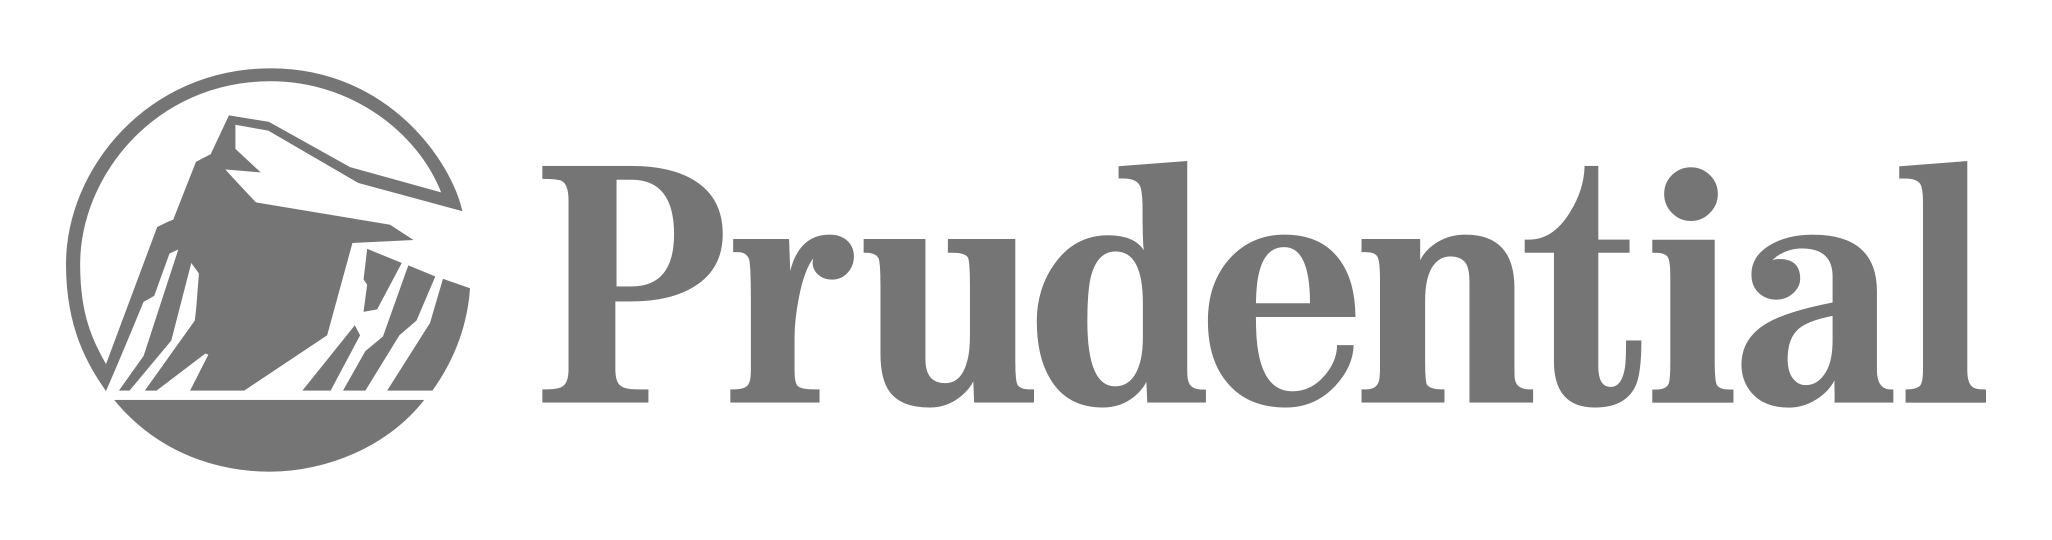 Prudential Logo - 2052x540.png